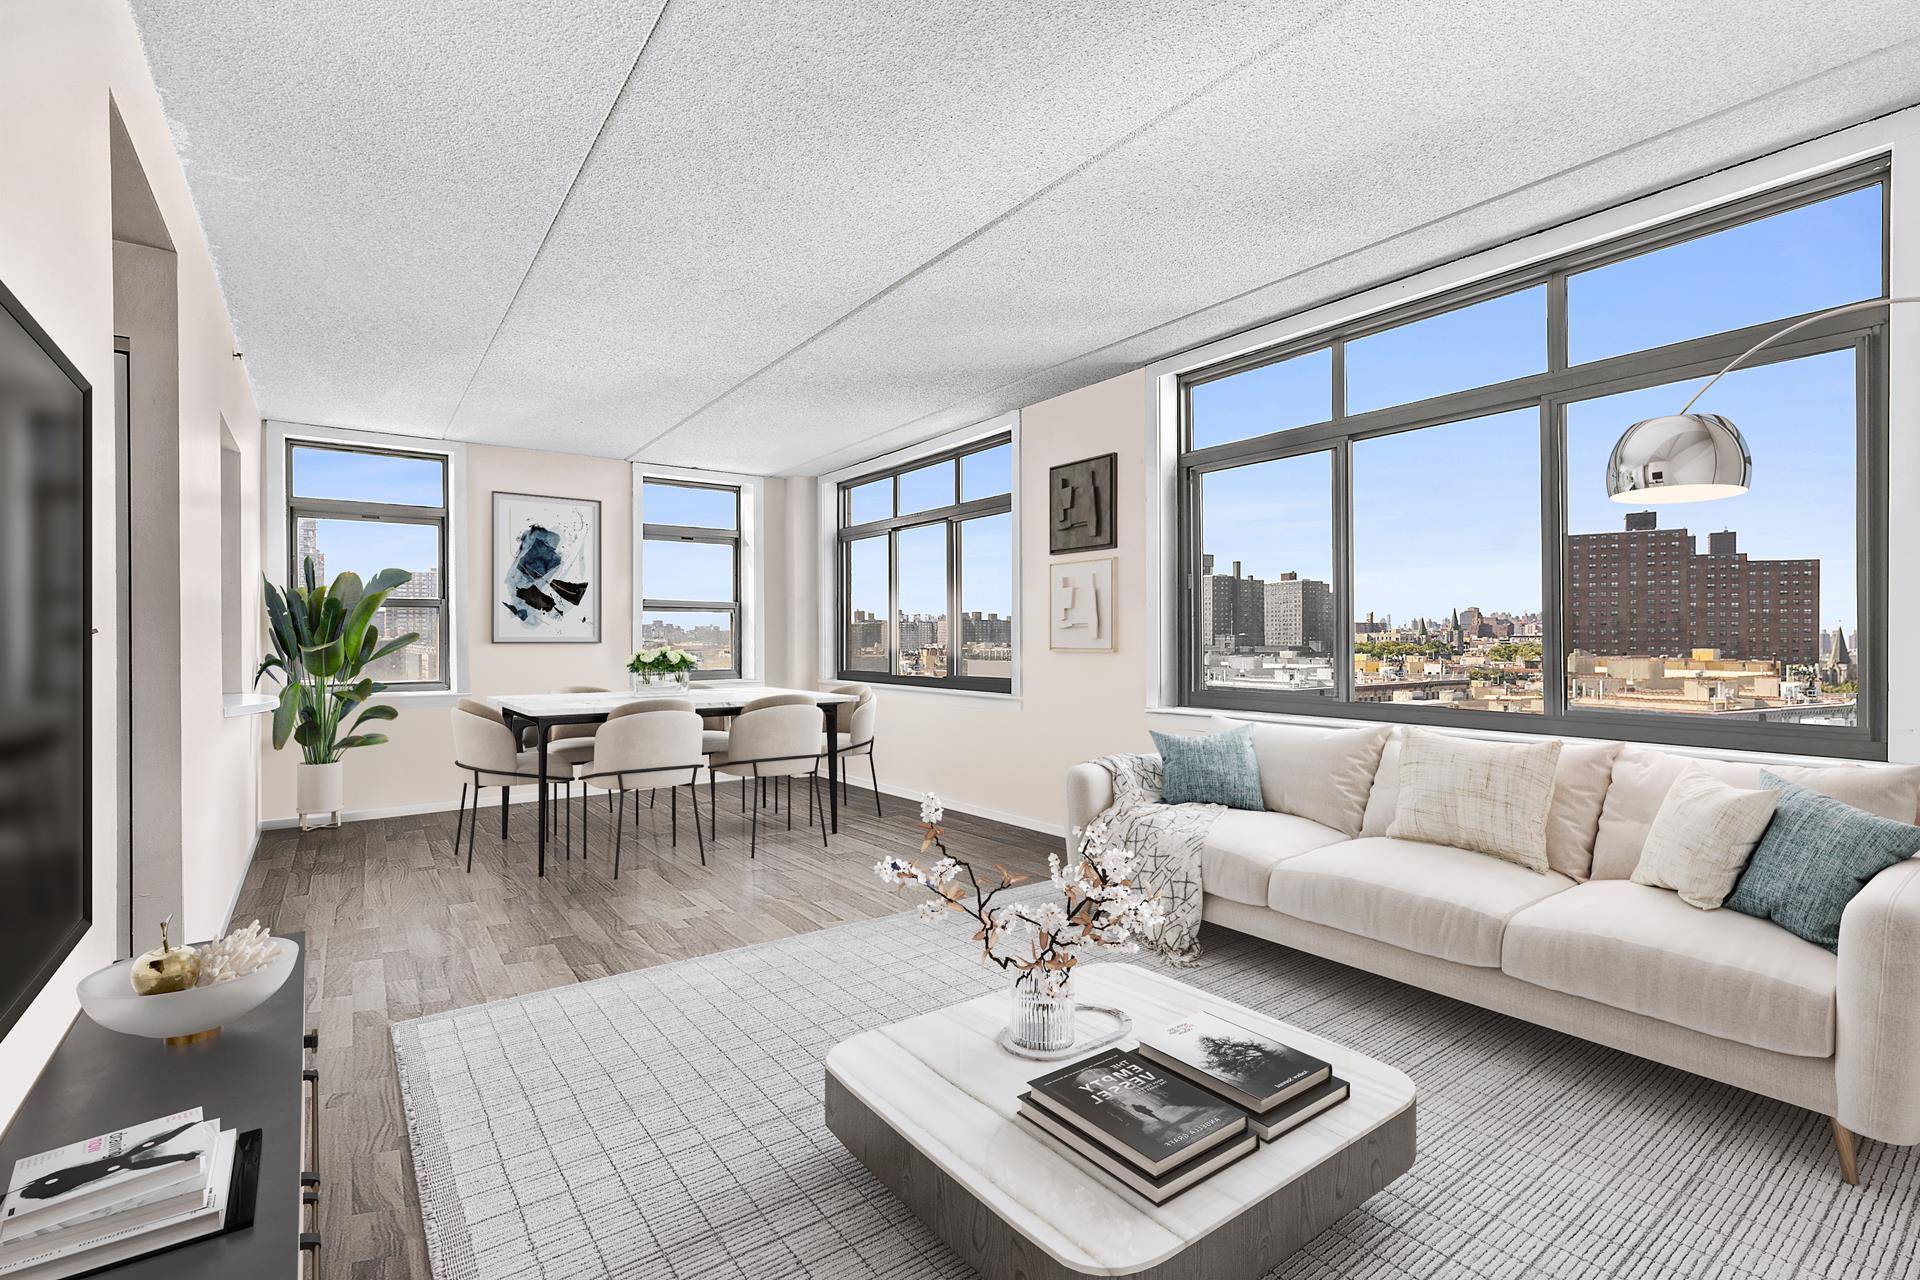 Welcome to Residence 1008 at The Sutton, a two bedroom two full bathroom corner apartment that has expansive views of West Harlem.